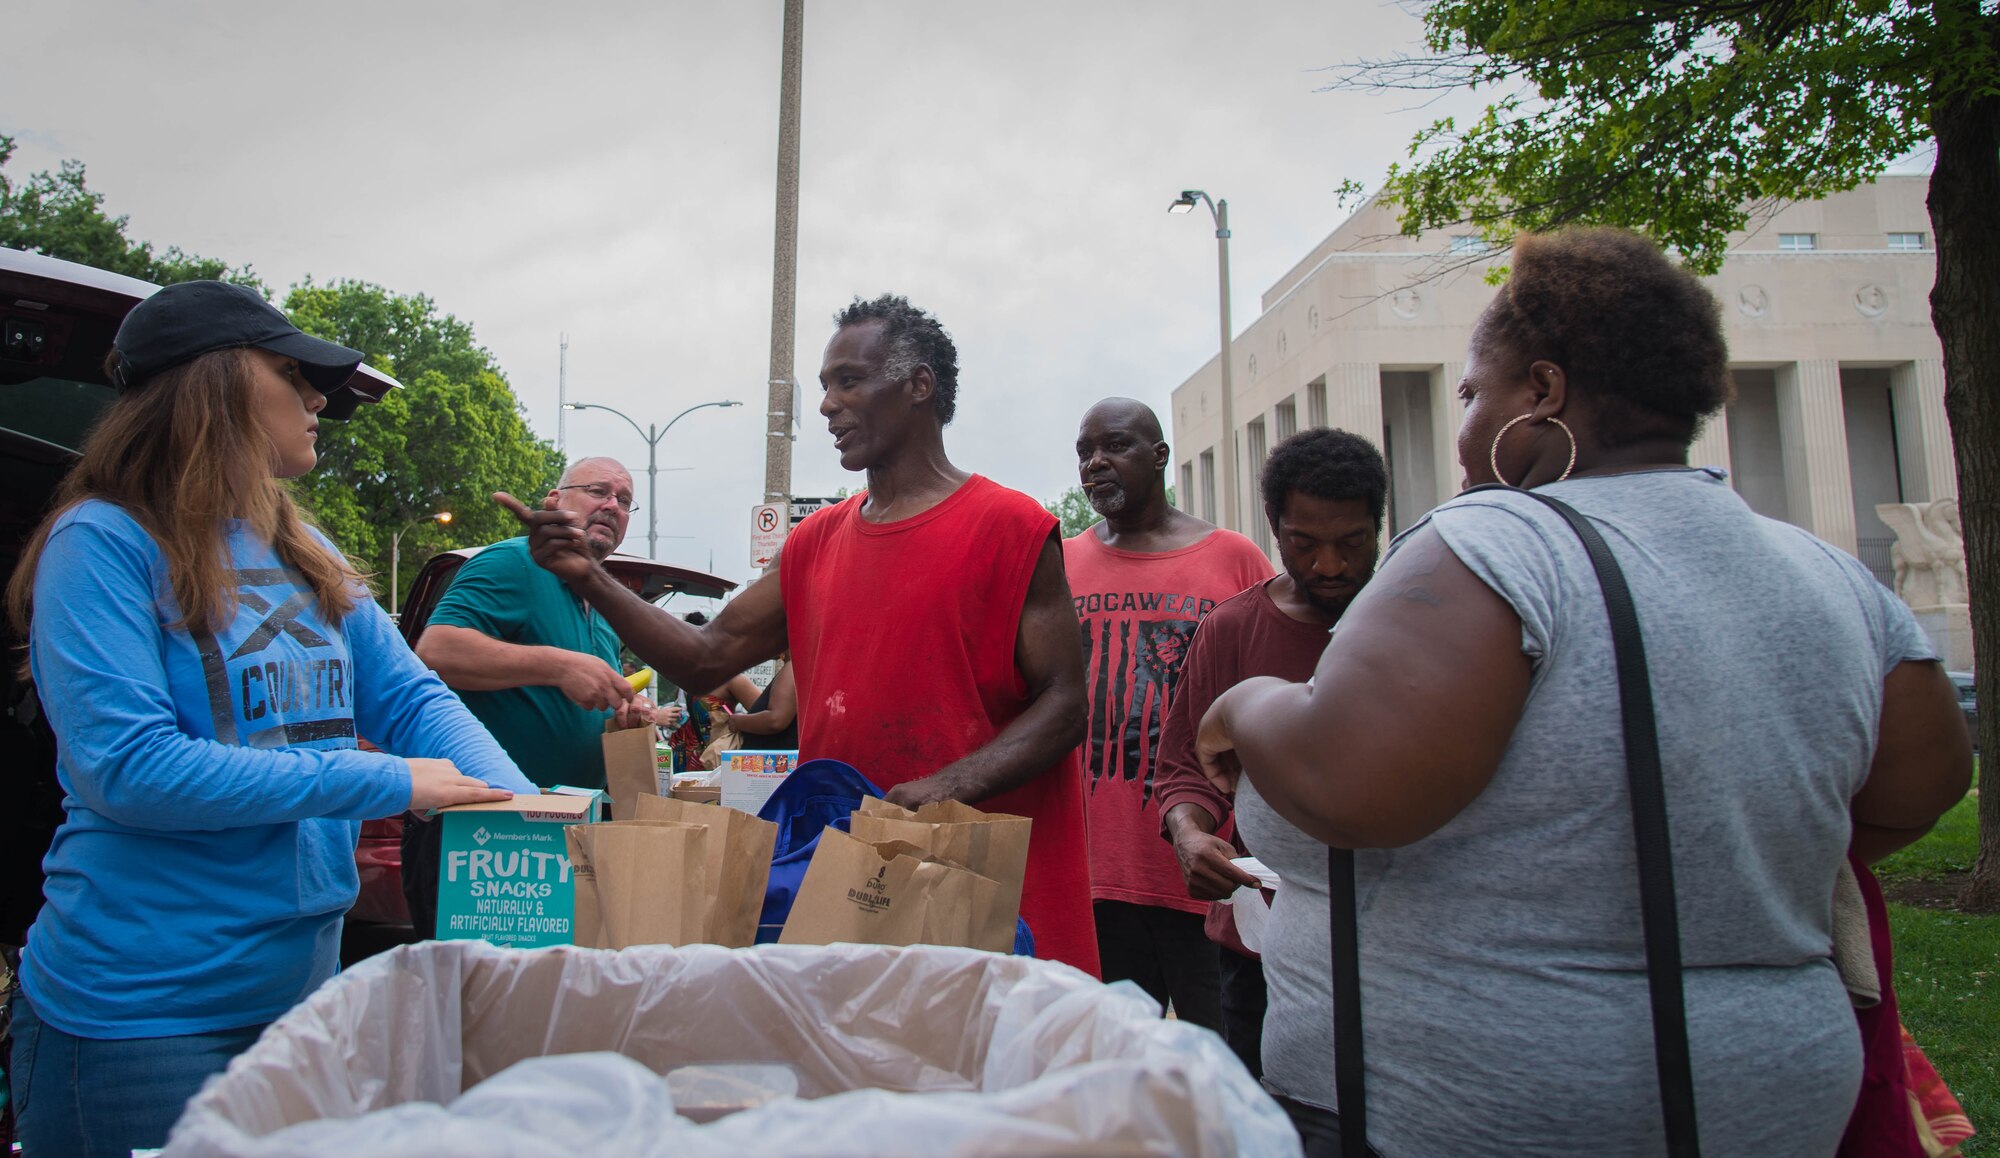 Every Wednesday, the Airmen meet in downtown St. Louis and provide an array of different supplies that are crucial for homeless people surviving. A hot meal, nonperishable items, fruit, hygiene kits and water are all things that have been donated to people in need.